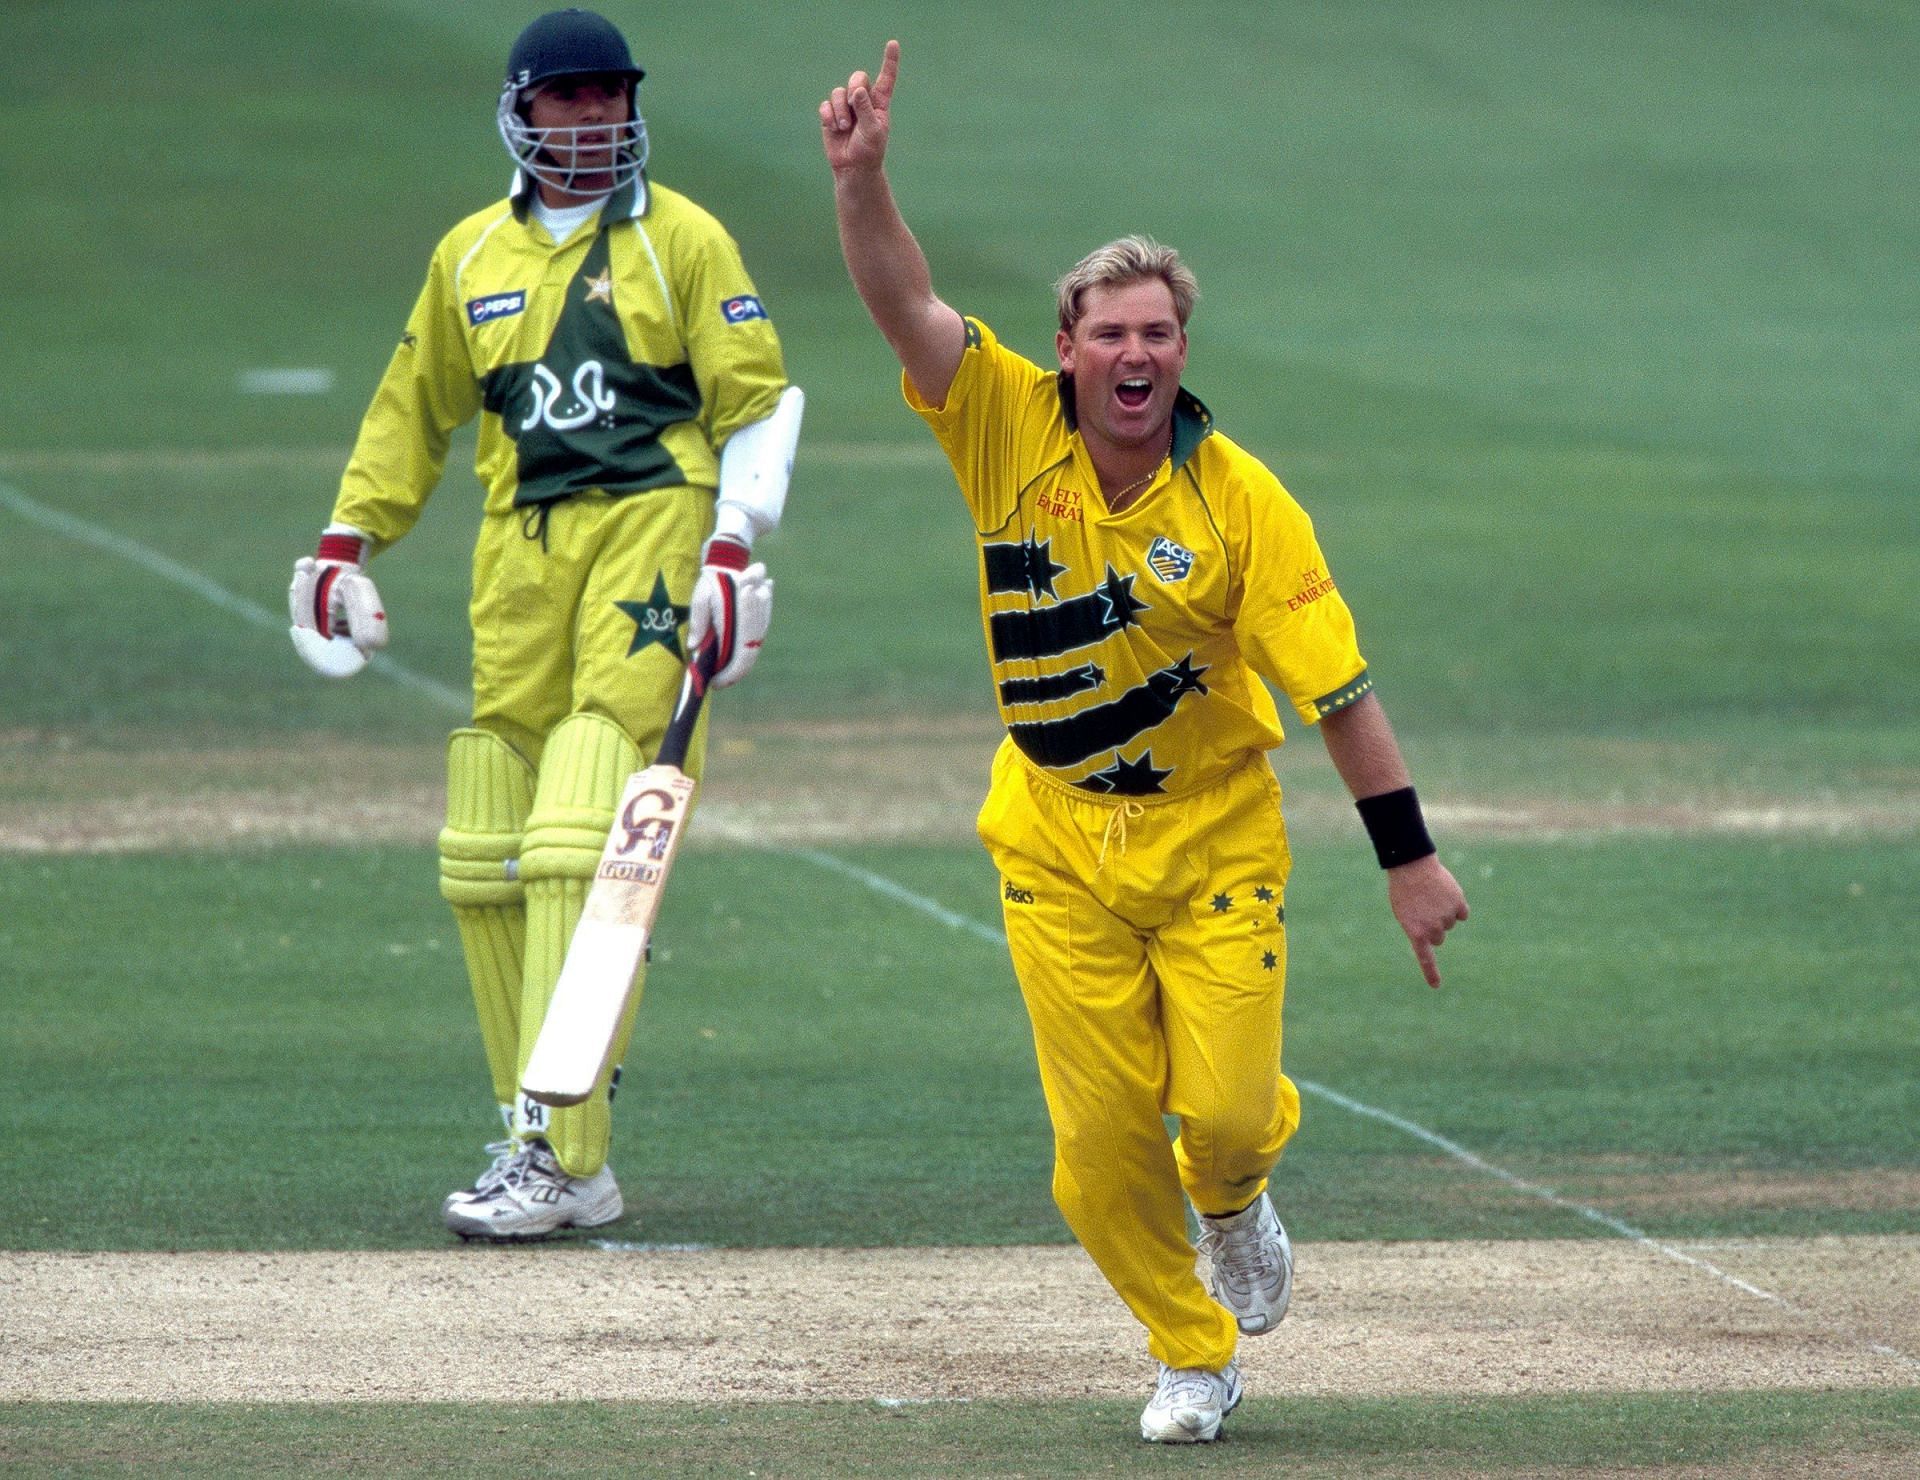 Shane Warne produced an all-time classic bowling performance in the 1999 ODI World Cup final against Pakistan (Image via ICC)